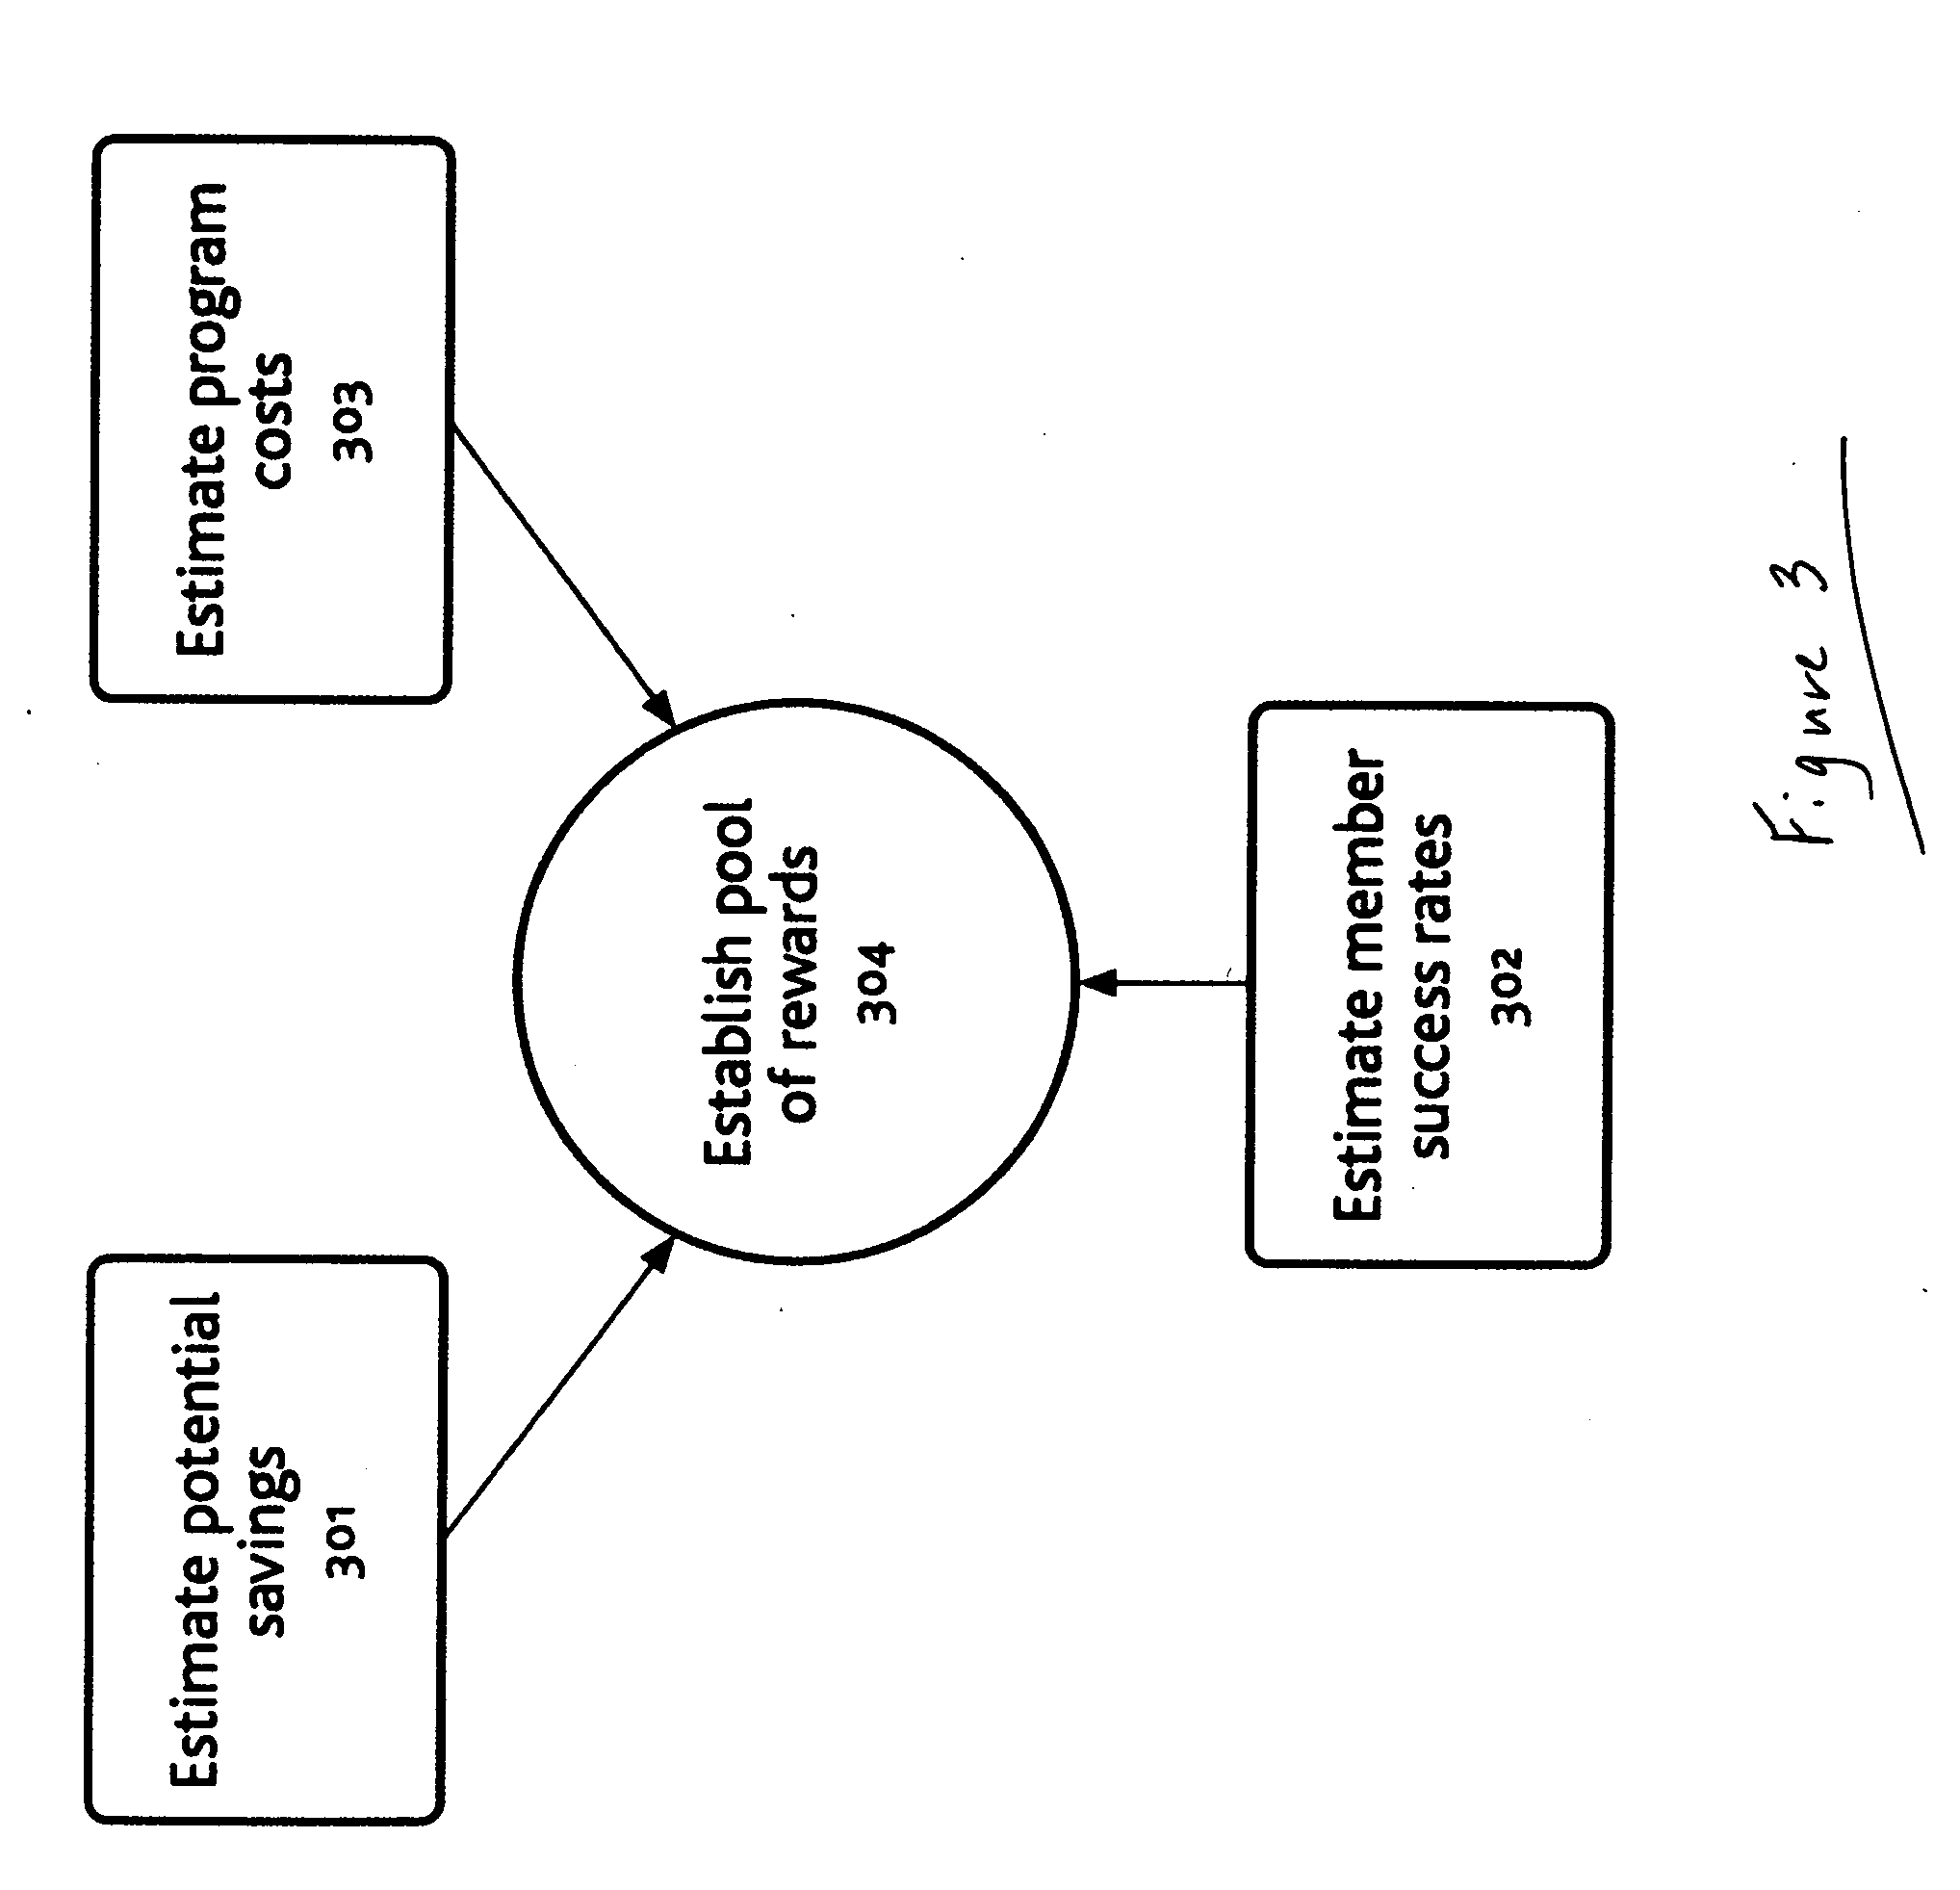 Method and system for improving health status of members of an entity